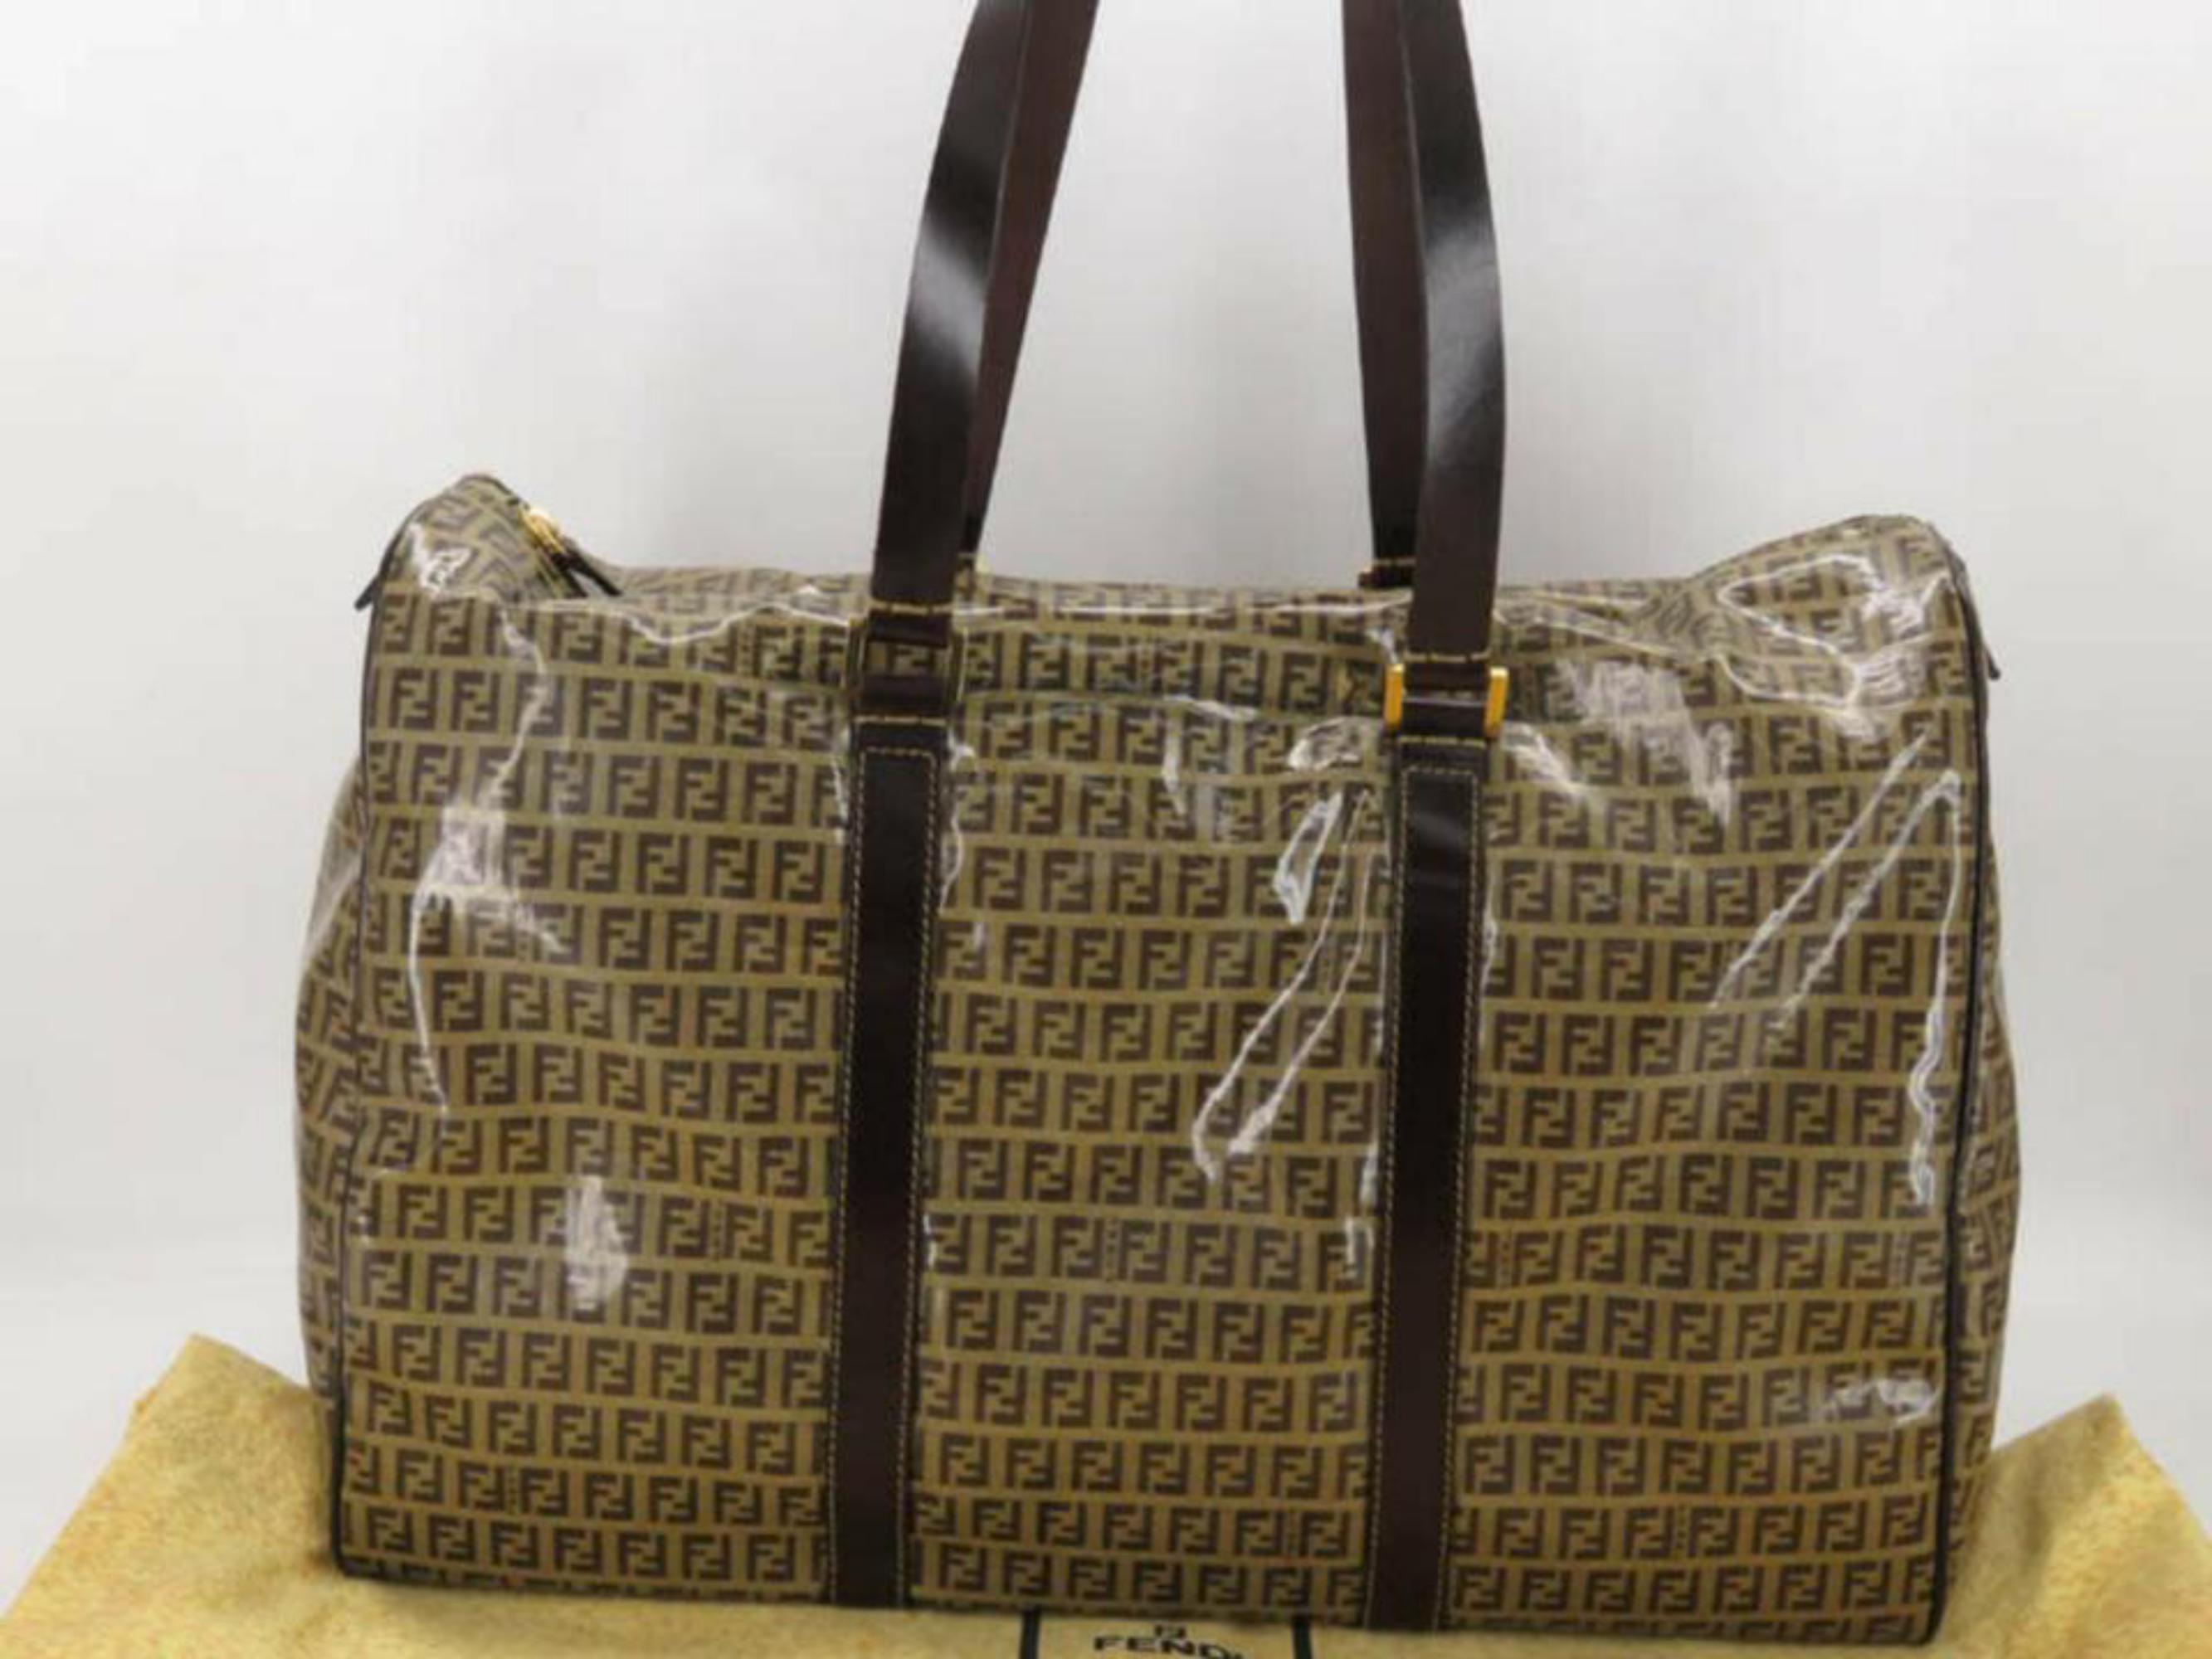 Fendi Crystal Ff Monogram Travel Tote Boston 870419 Brown Vinyl Shoulder Bag In Excellent Condition For Sale In Forest Hills, NY